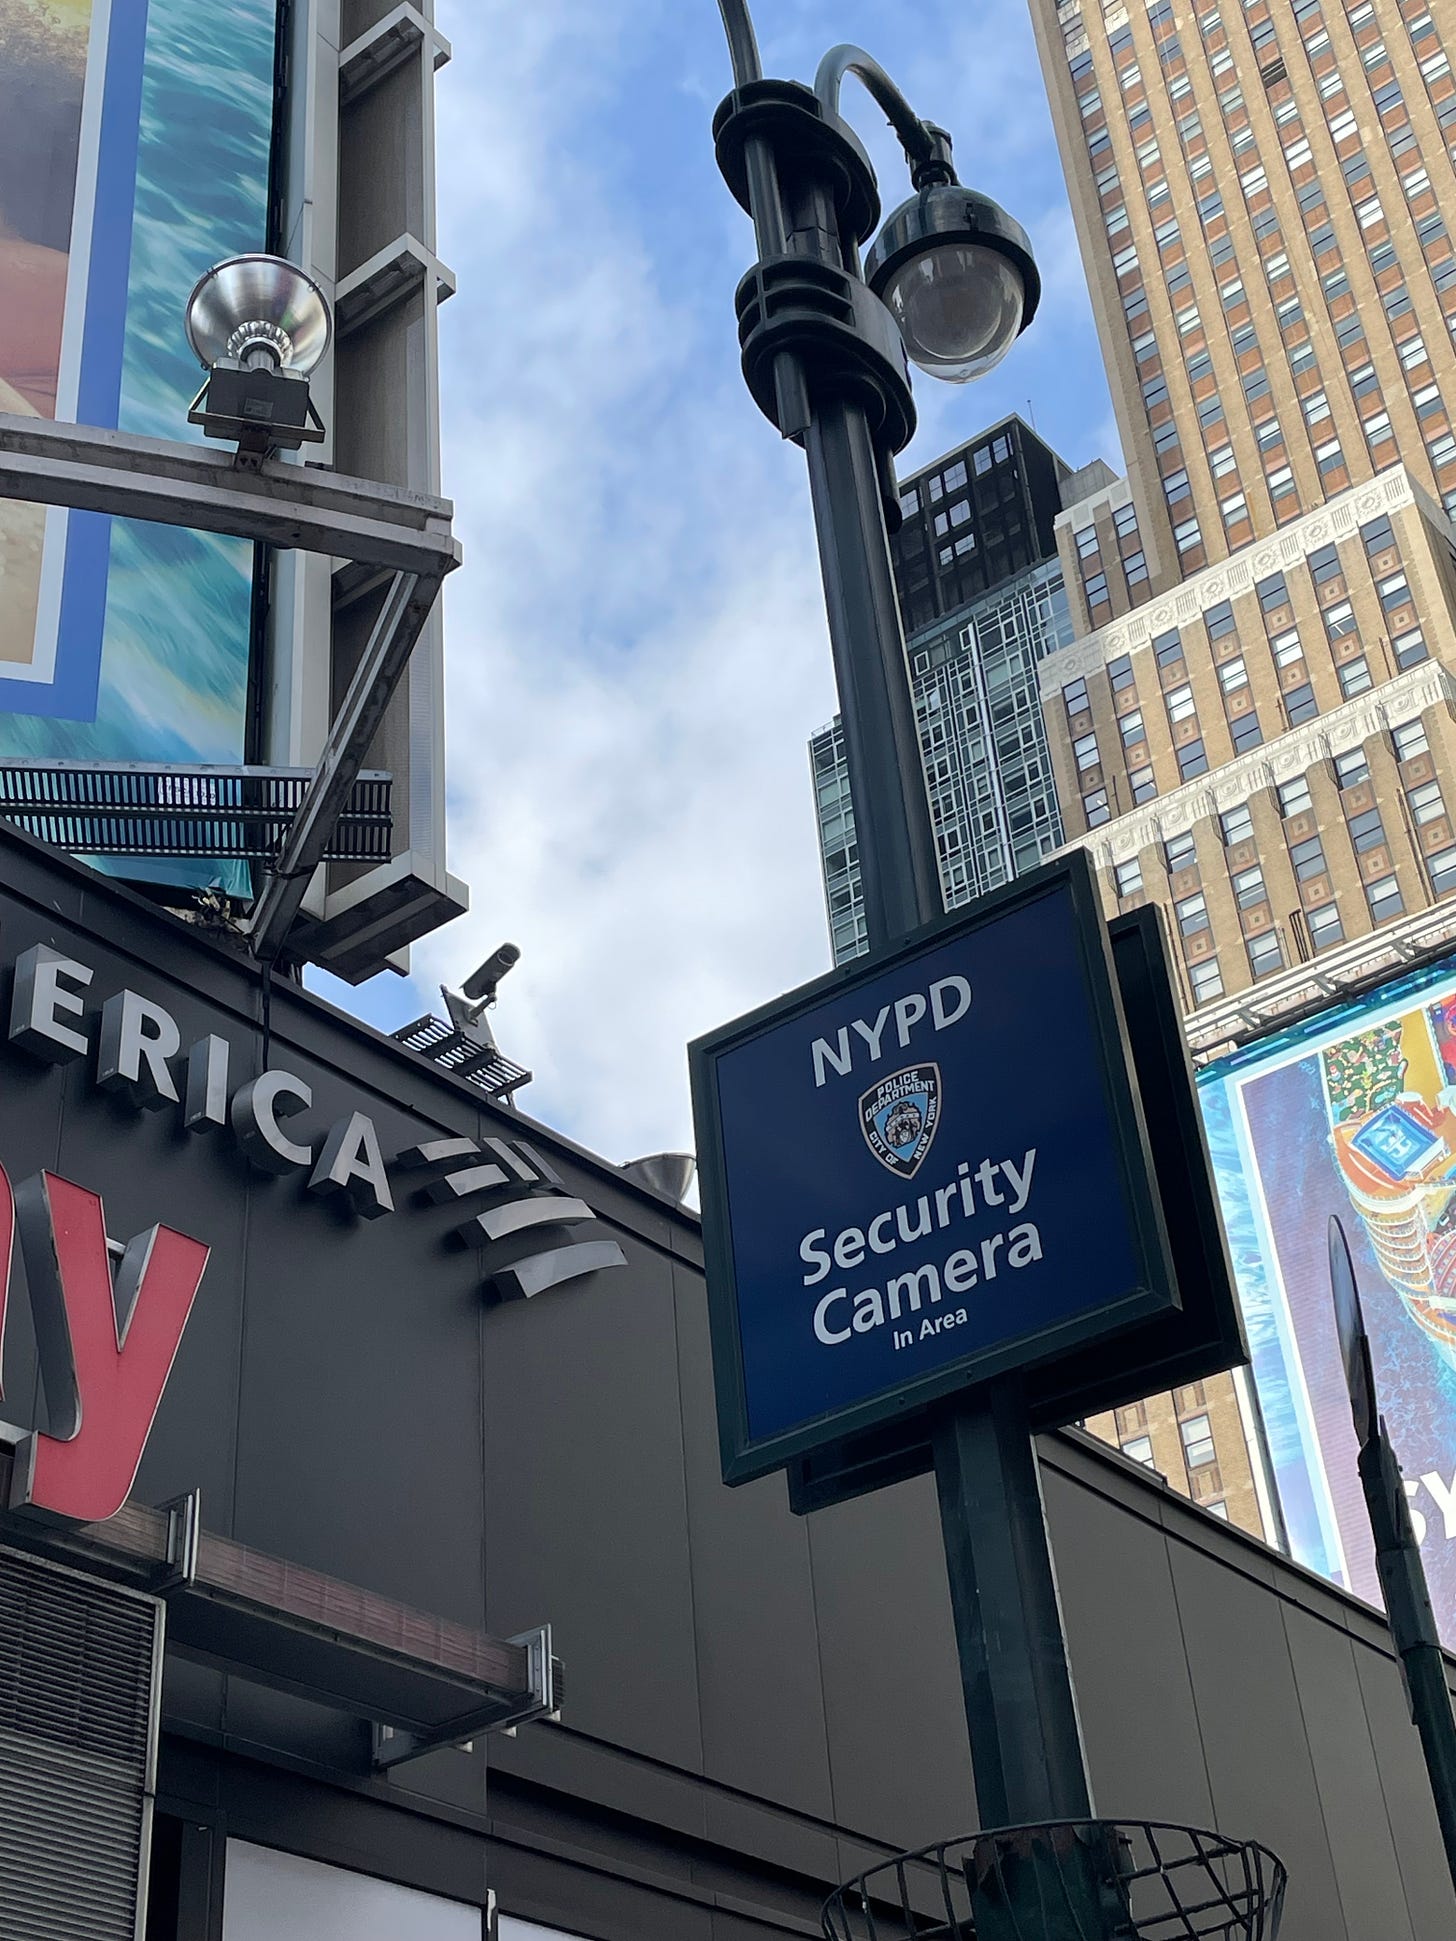 A photo of an NYPD security camera outside Penn Station.